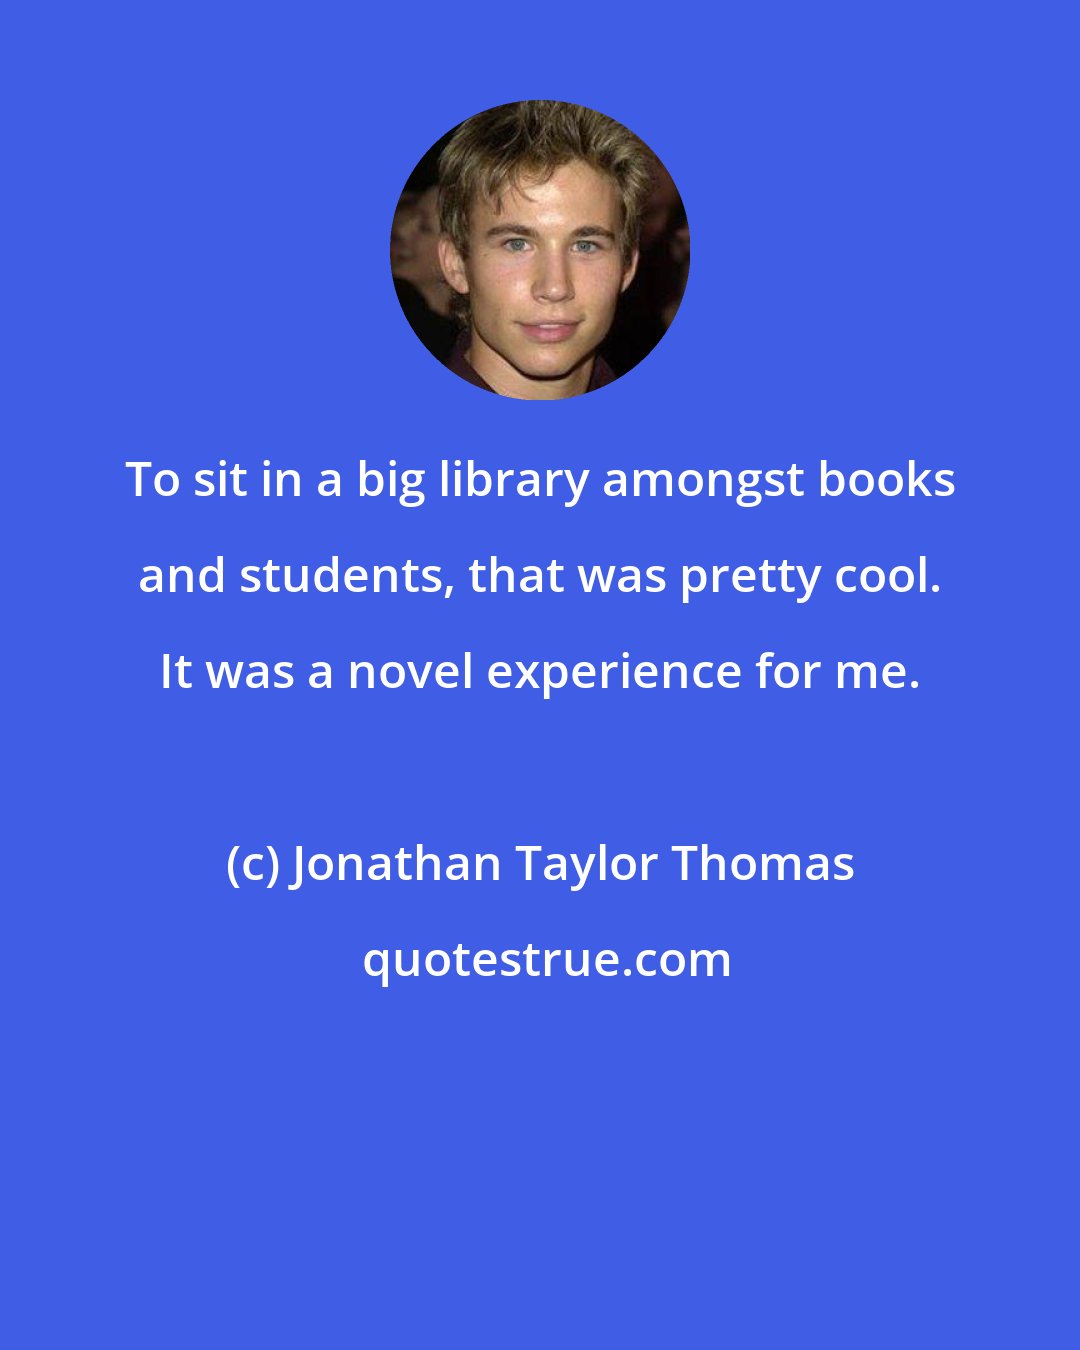 Jonathan Taylor Thomas: To sit in a big library amongst books and students, that was pretty cool. It was a novel experience for me.